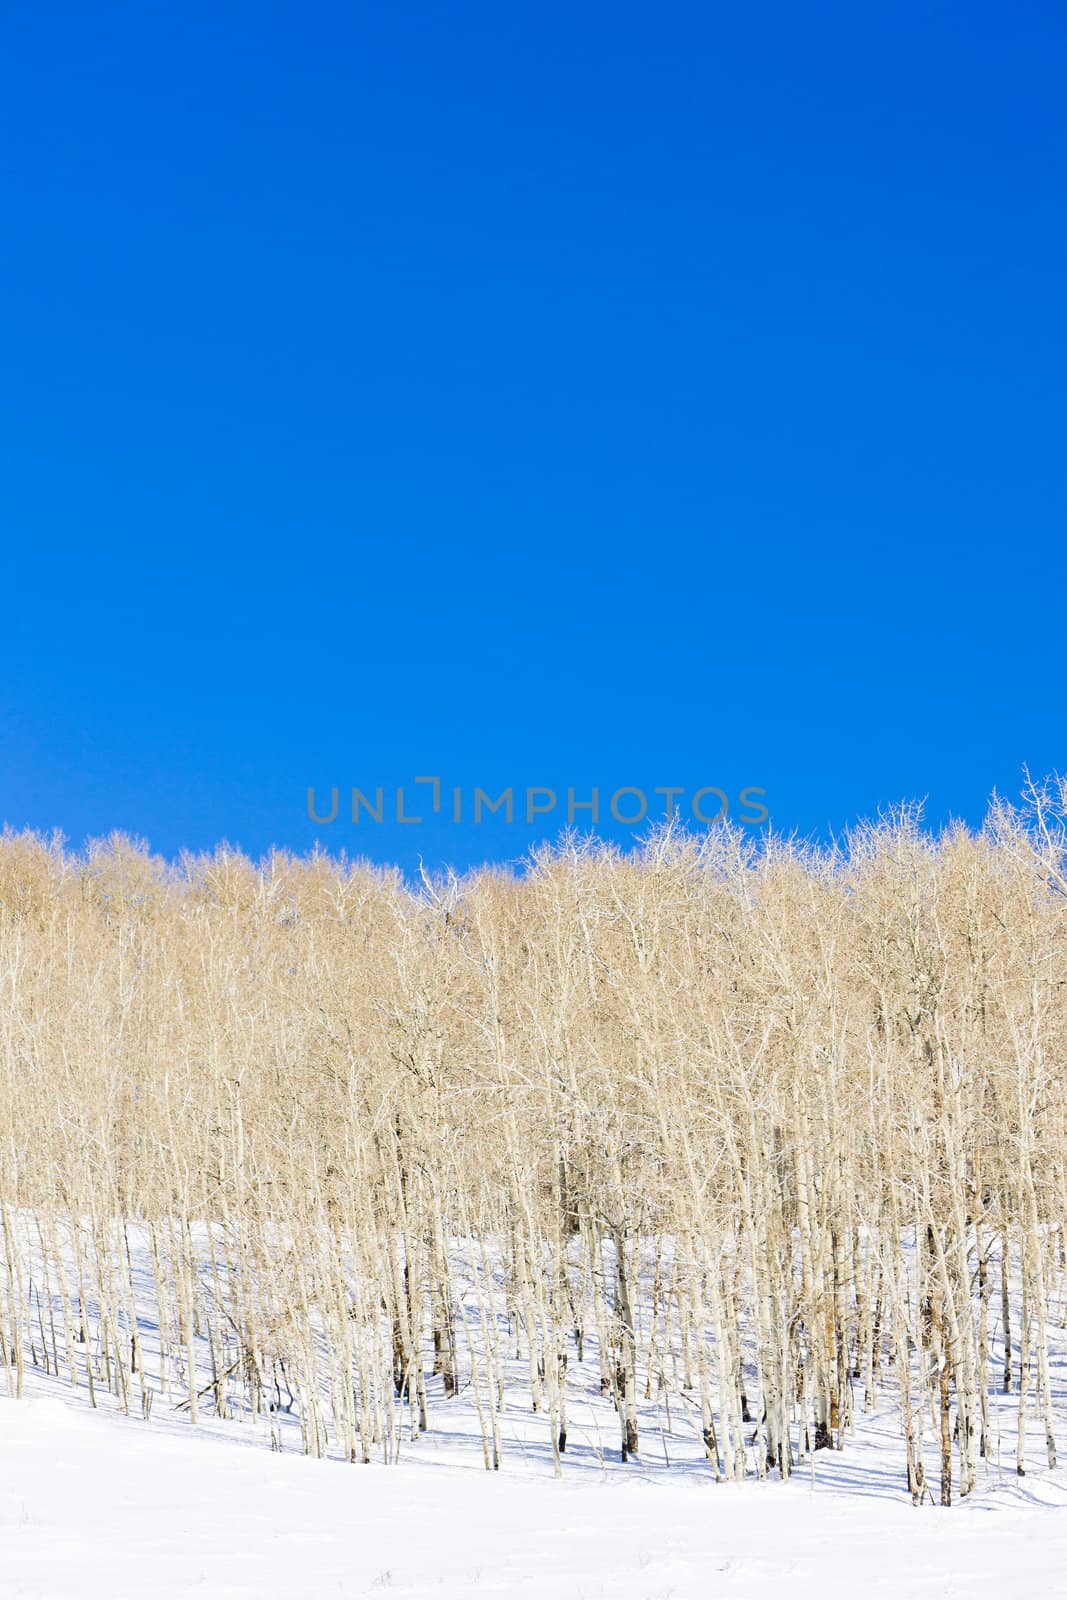 winter fores, Utah, USA by phbcz